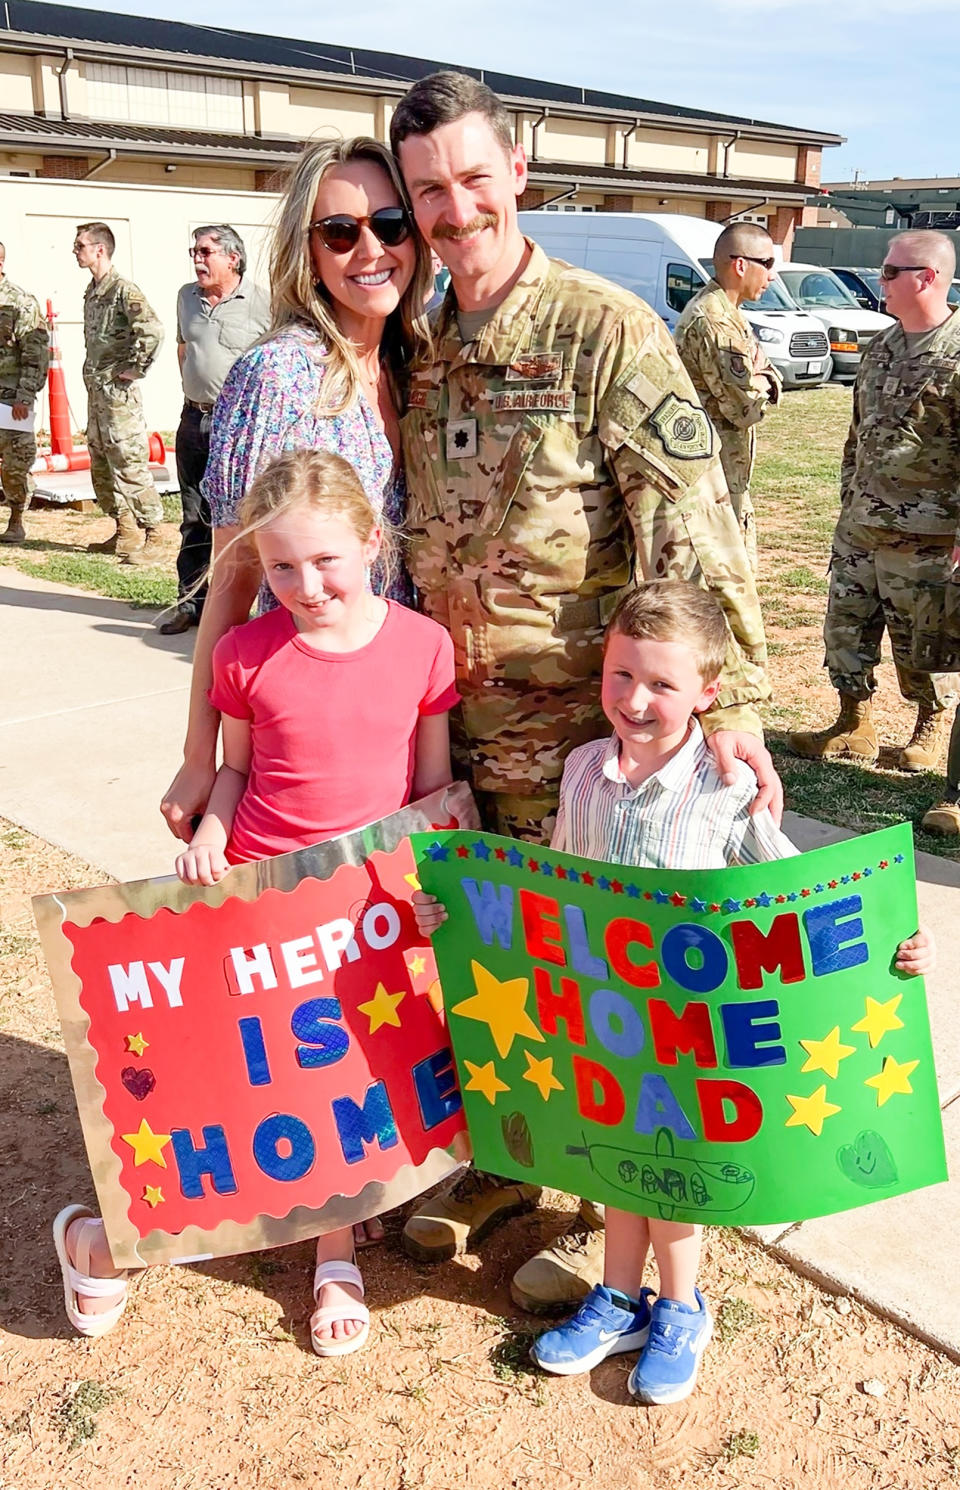 The Clegg family, reunited, at Dyess Air Force Base. (Courtesy Maxine Clegg)